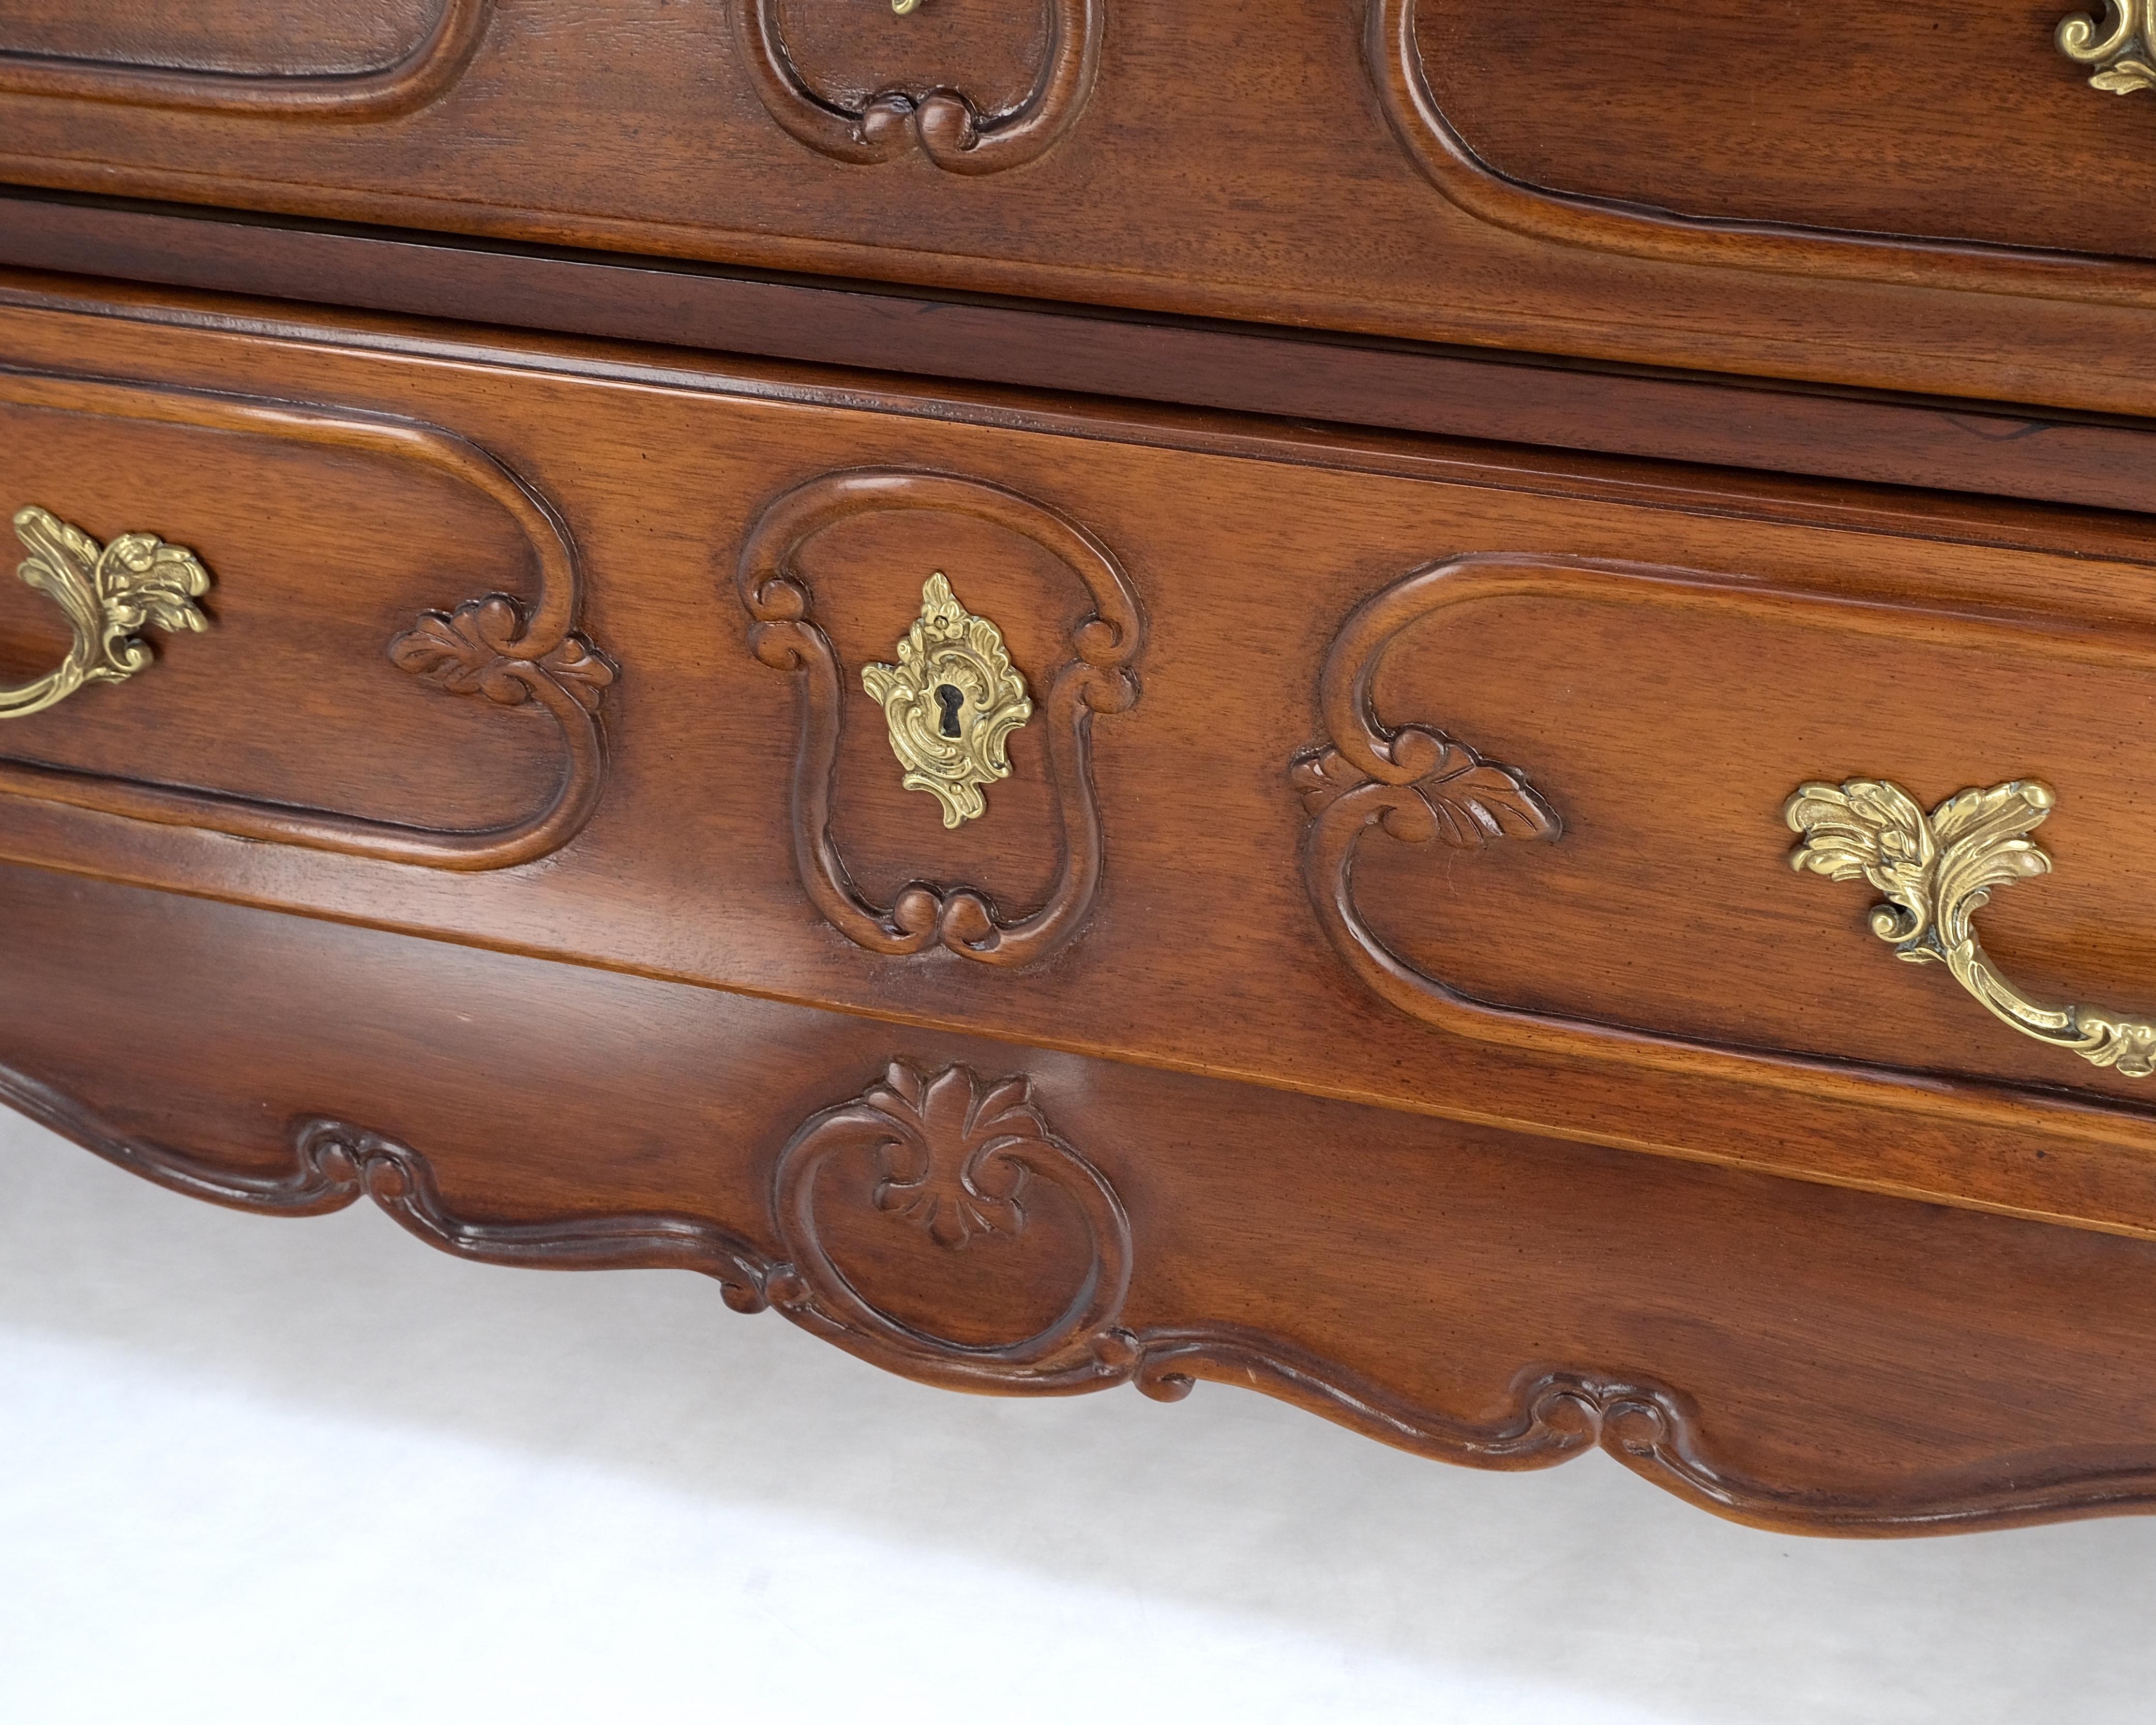 French Provincial Bombe Country French Carved Cherry 3 Drawer Dresser Brass Hardware Pulls Mint! For Sale